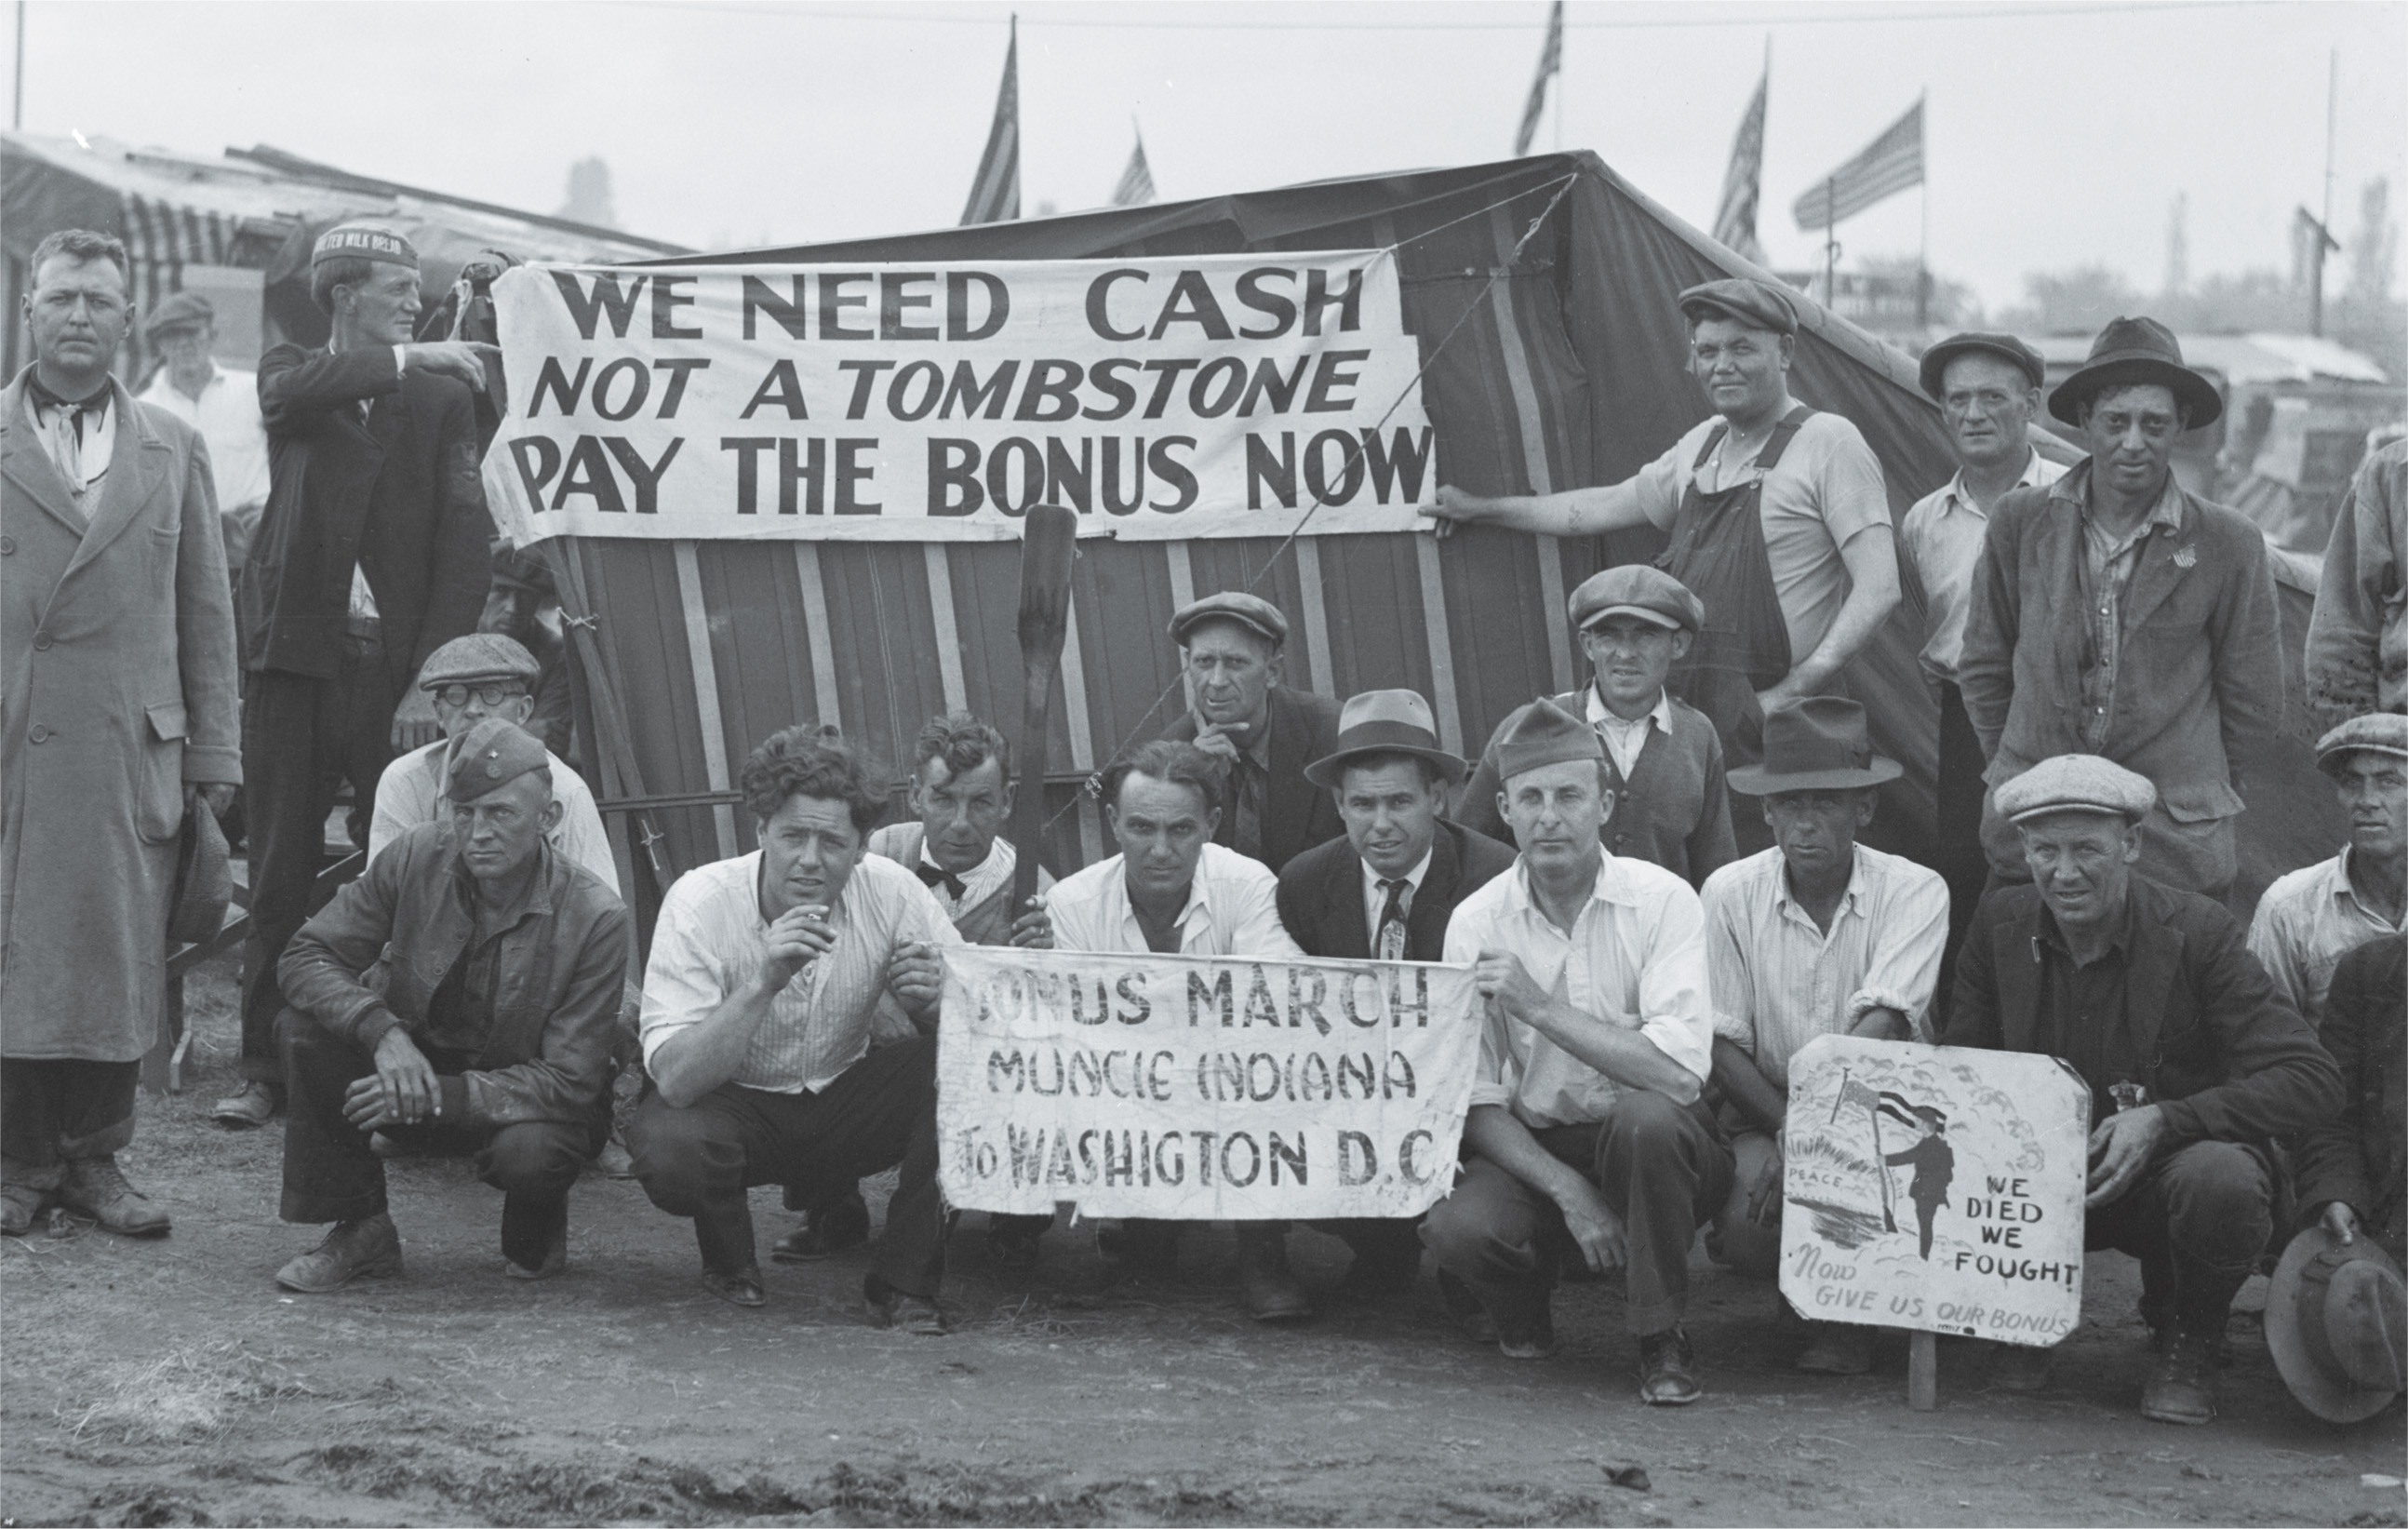 Photo: Bonus Army shantytown with banners: We need cash, not a tombstone. Pay the bonus now.